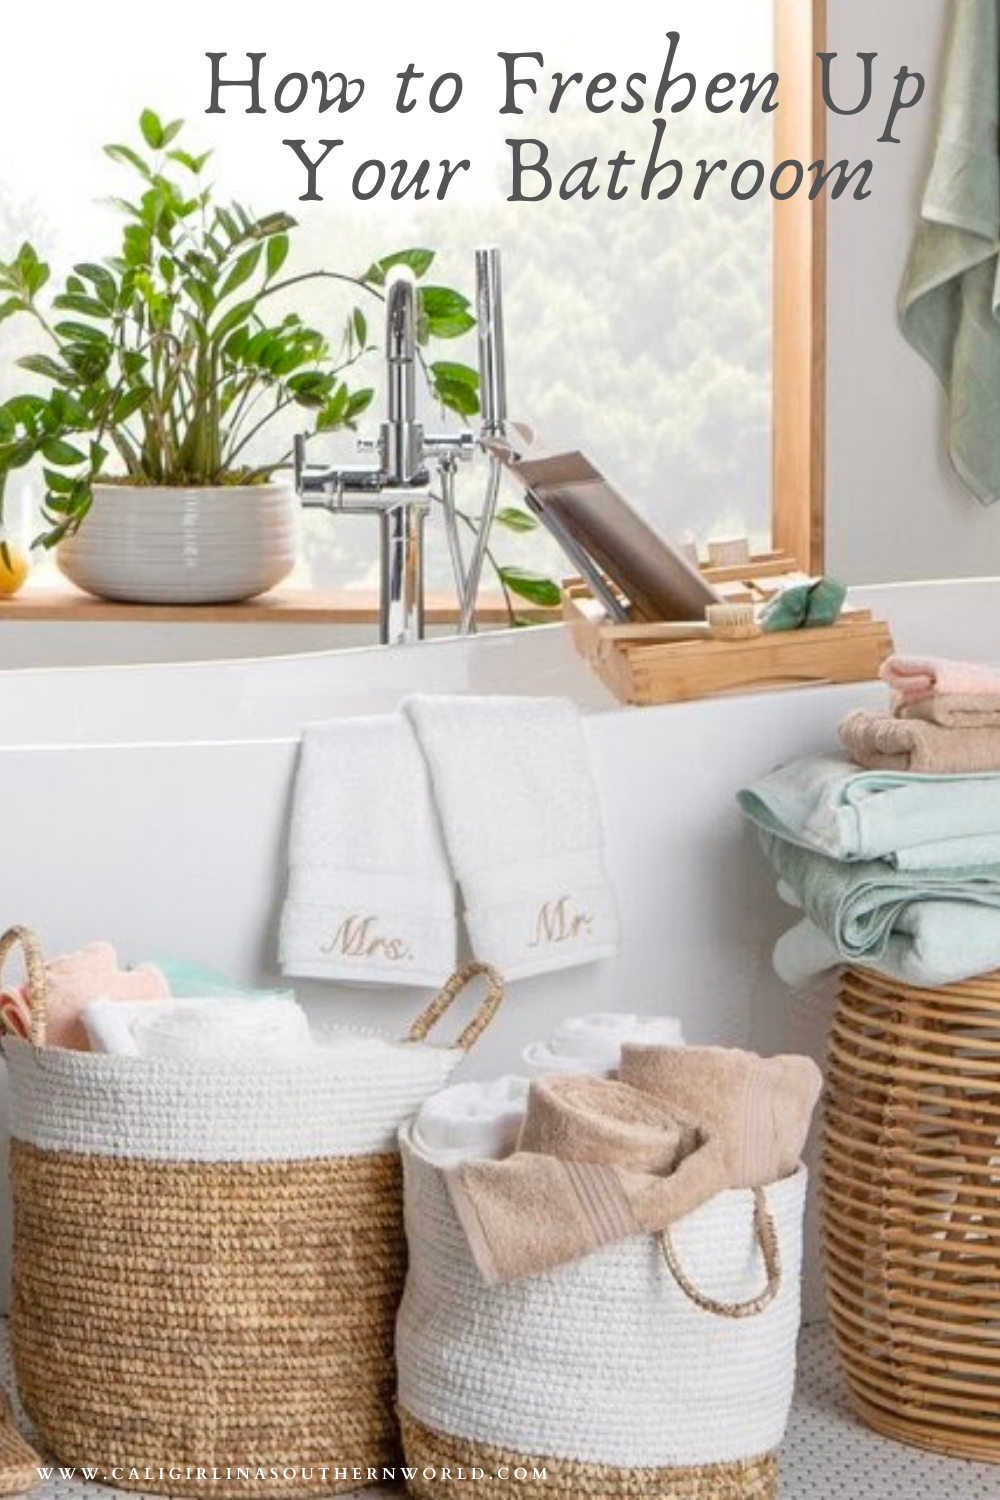 Serene bathtub view with a plant in the window behind the tub and baskets next to the tub with plush towels in them.